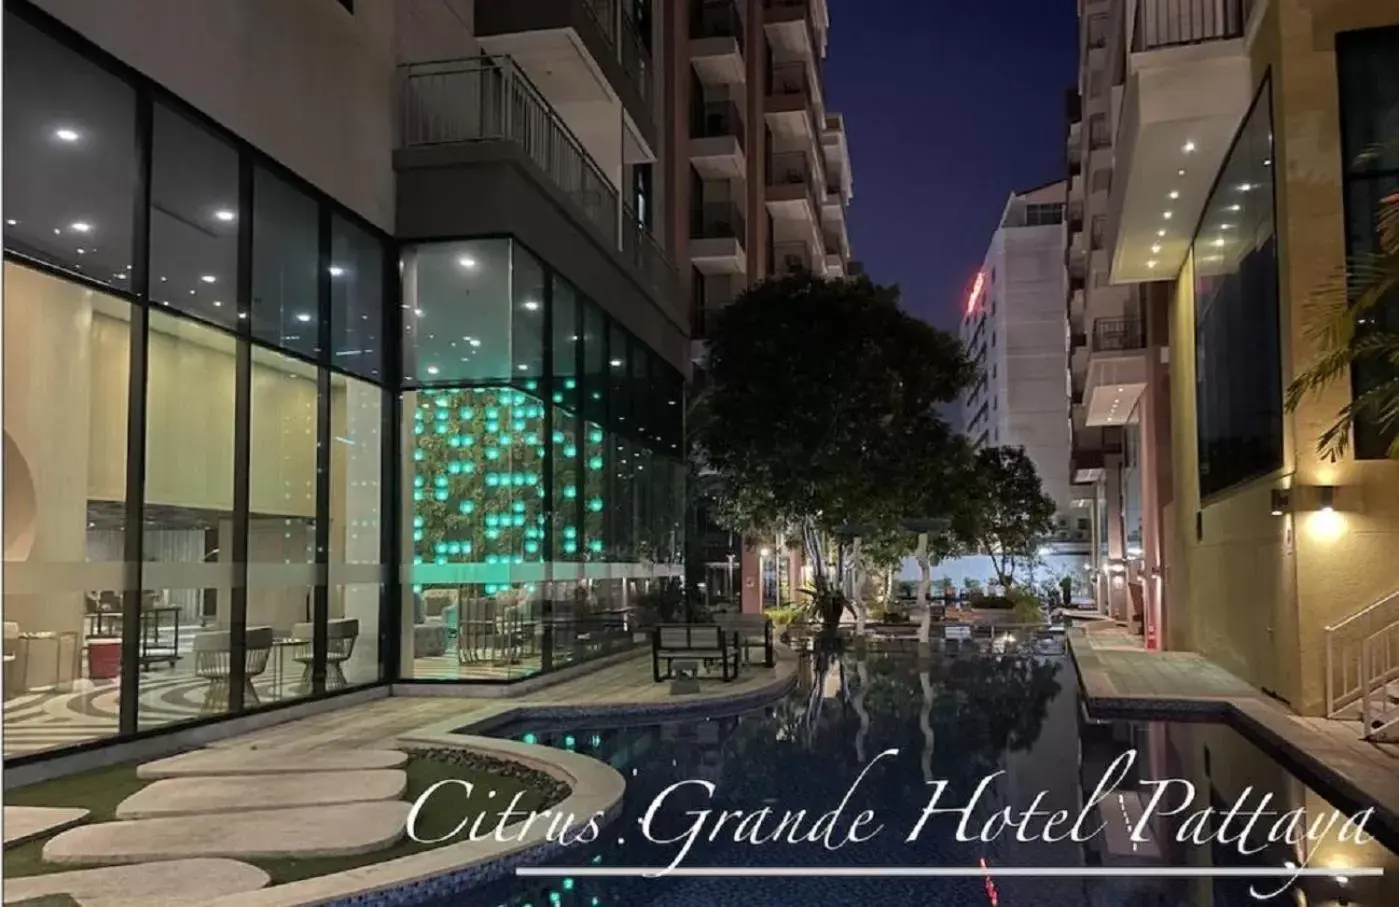 Property building in Citrus Grande Hotel Pattaya by Compass Hospitality